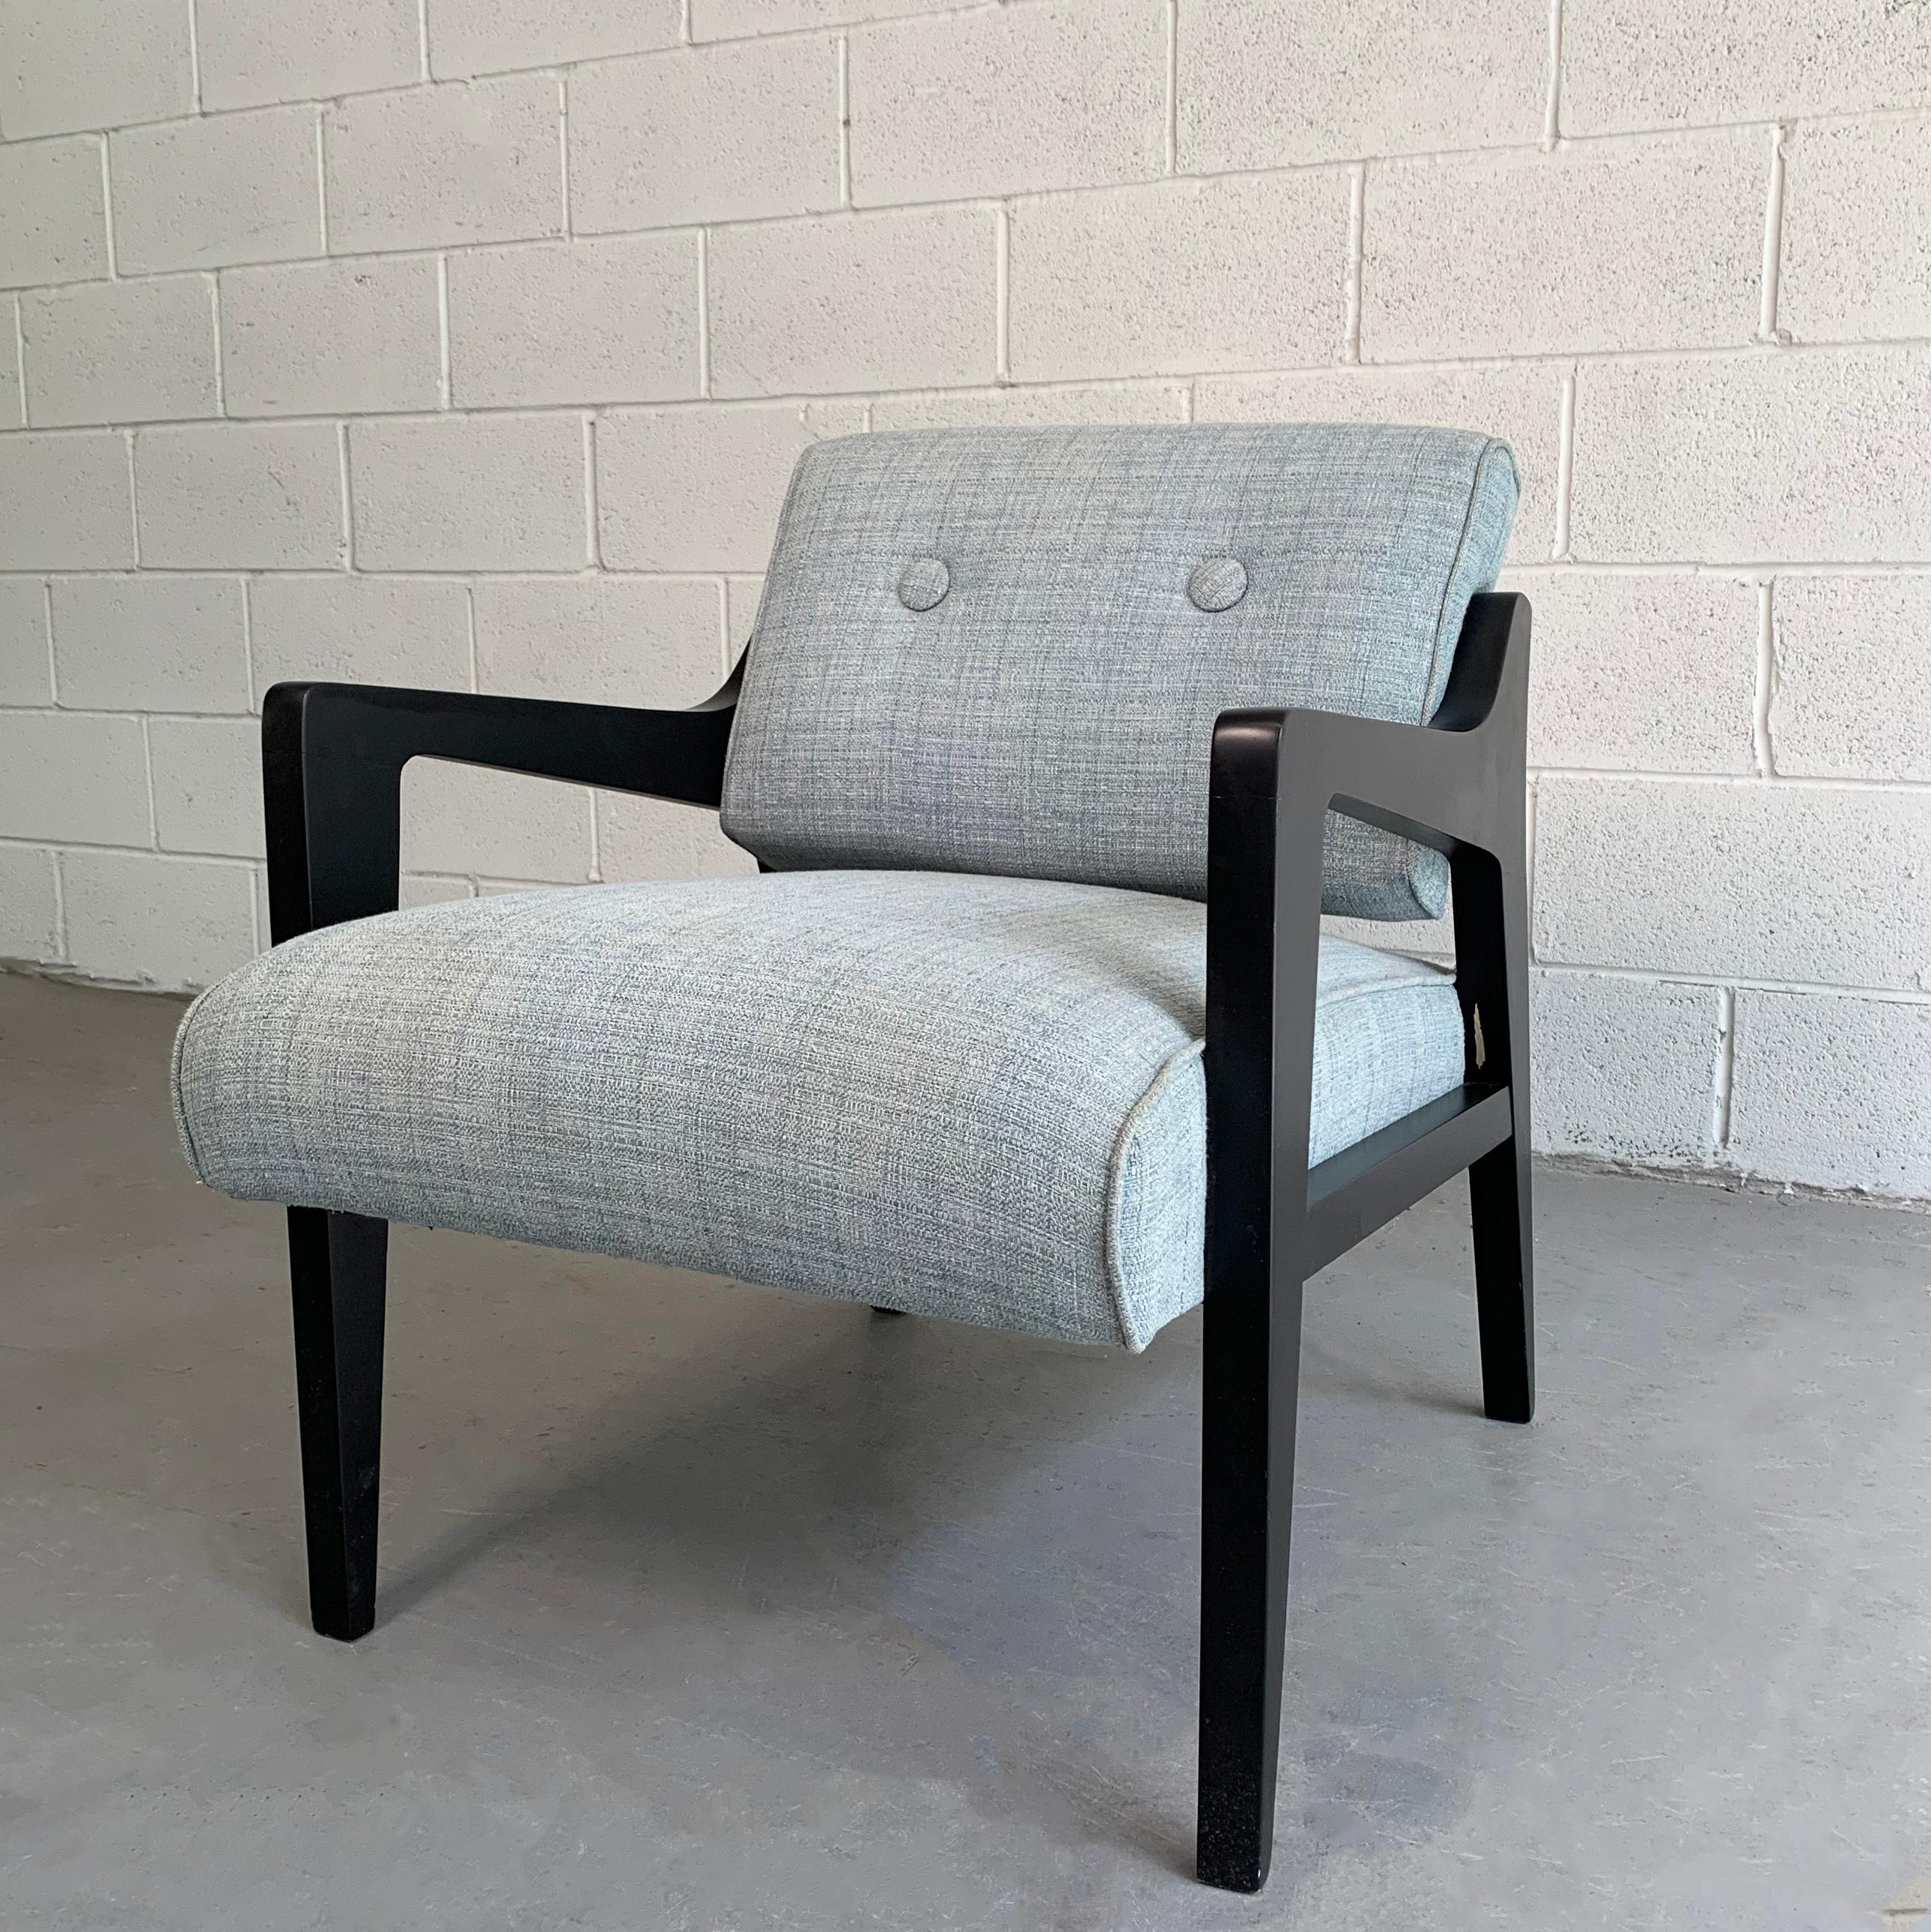 American Black Lacquered Lounge Chair by Edward Wormley for Dunbar